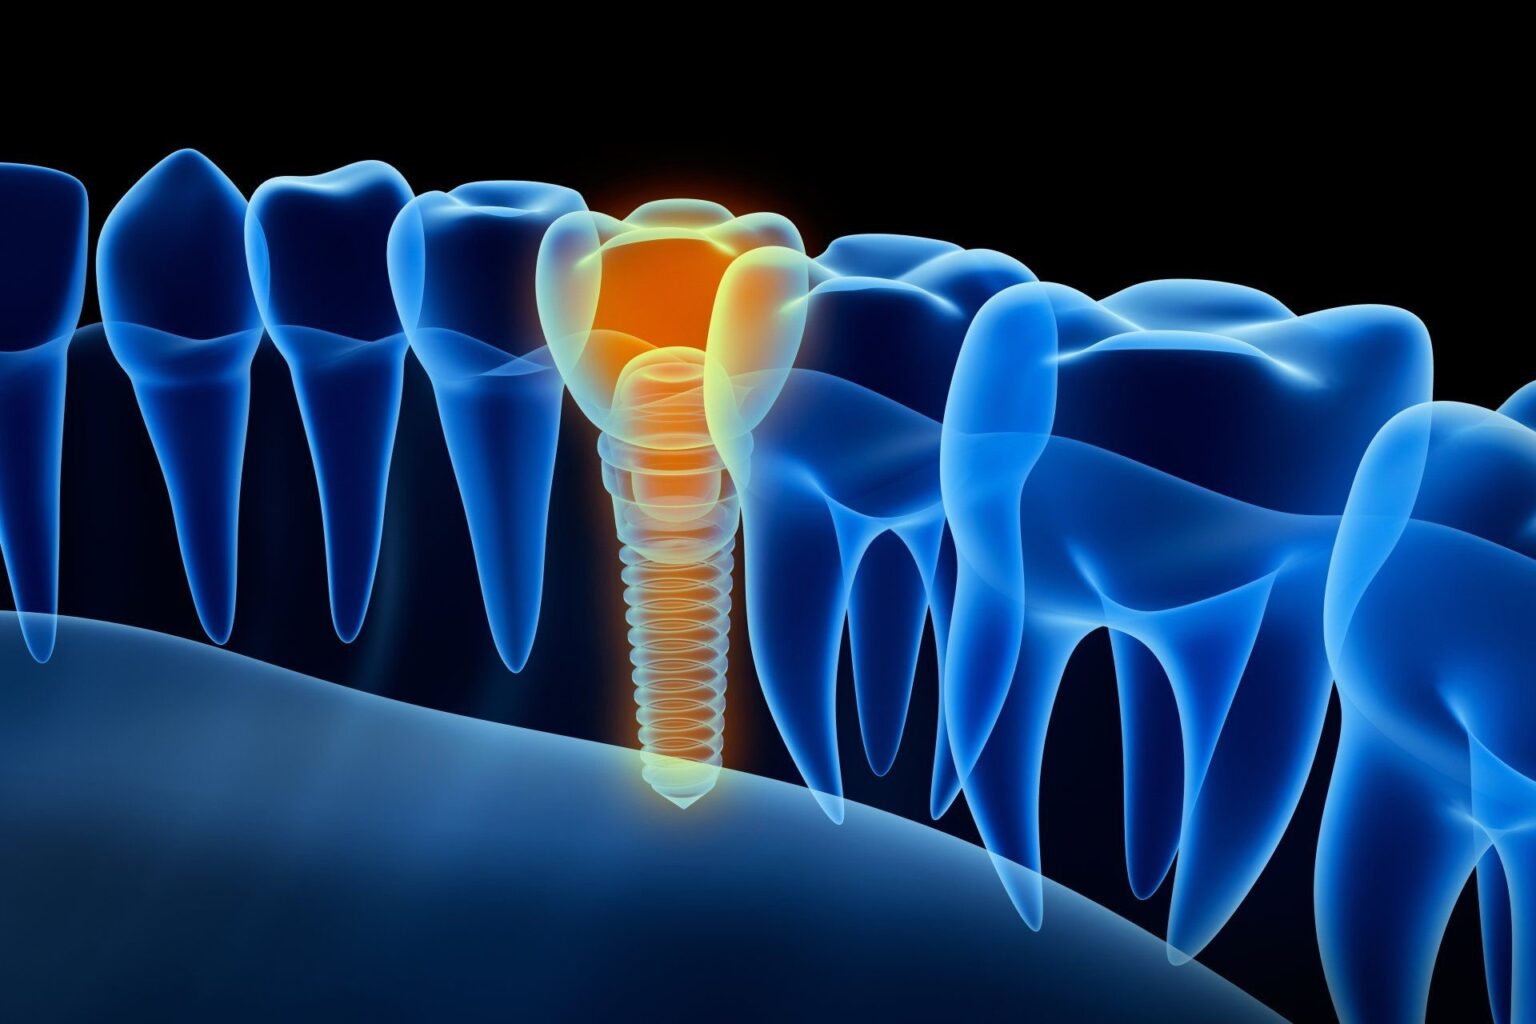 Implants: Sturdy. Easy to clean. Look and feel like real teeth.